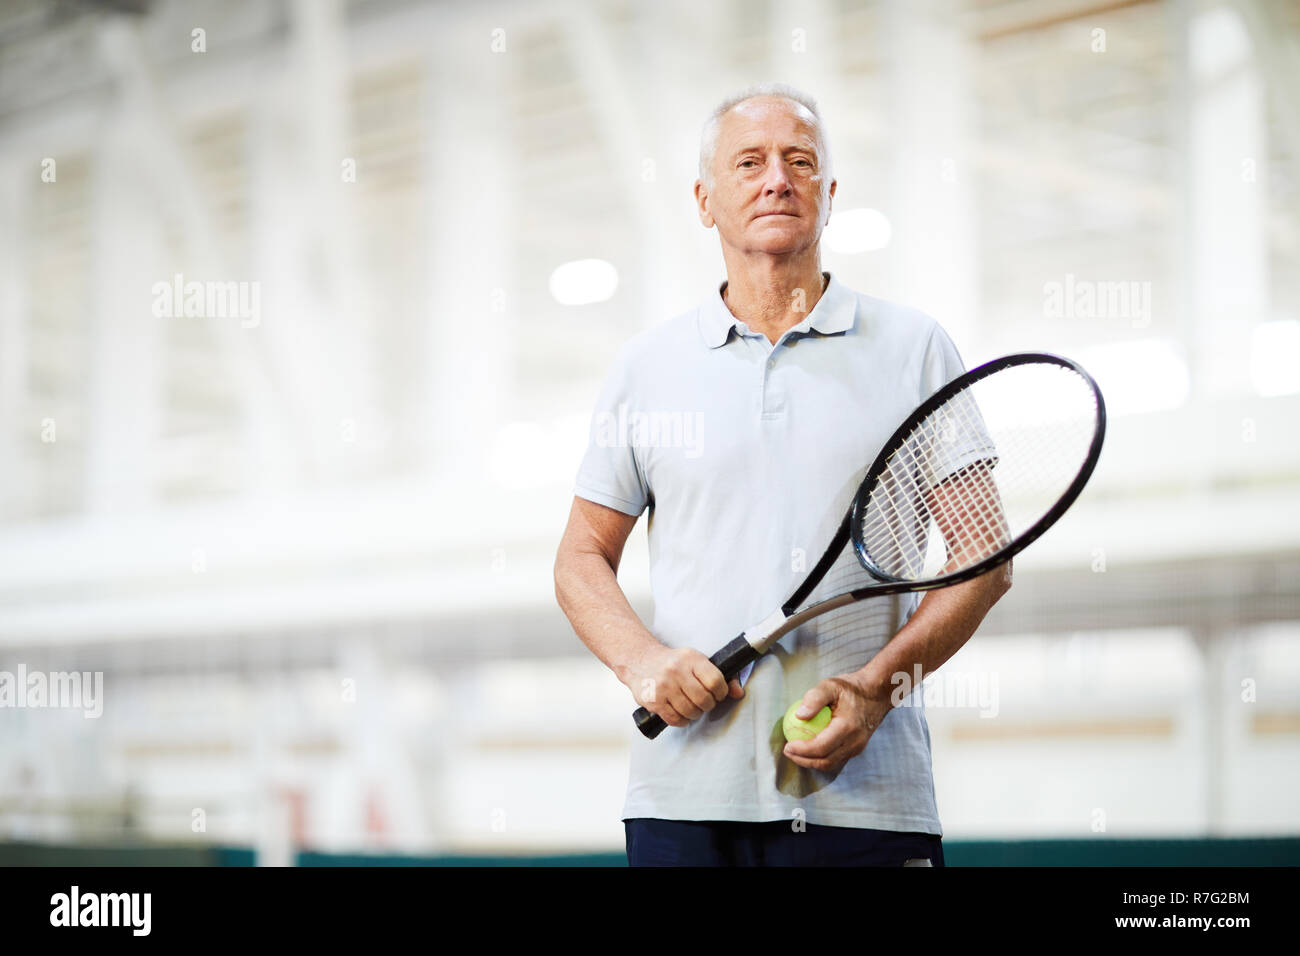 Tennis player in sports center Stock Photo